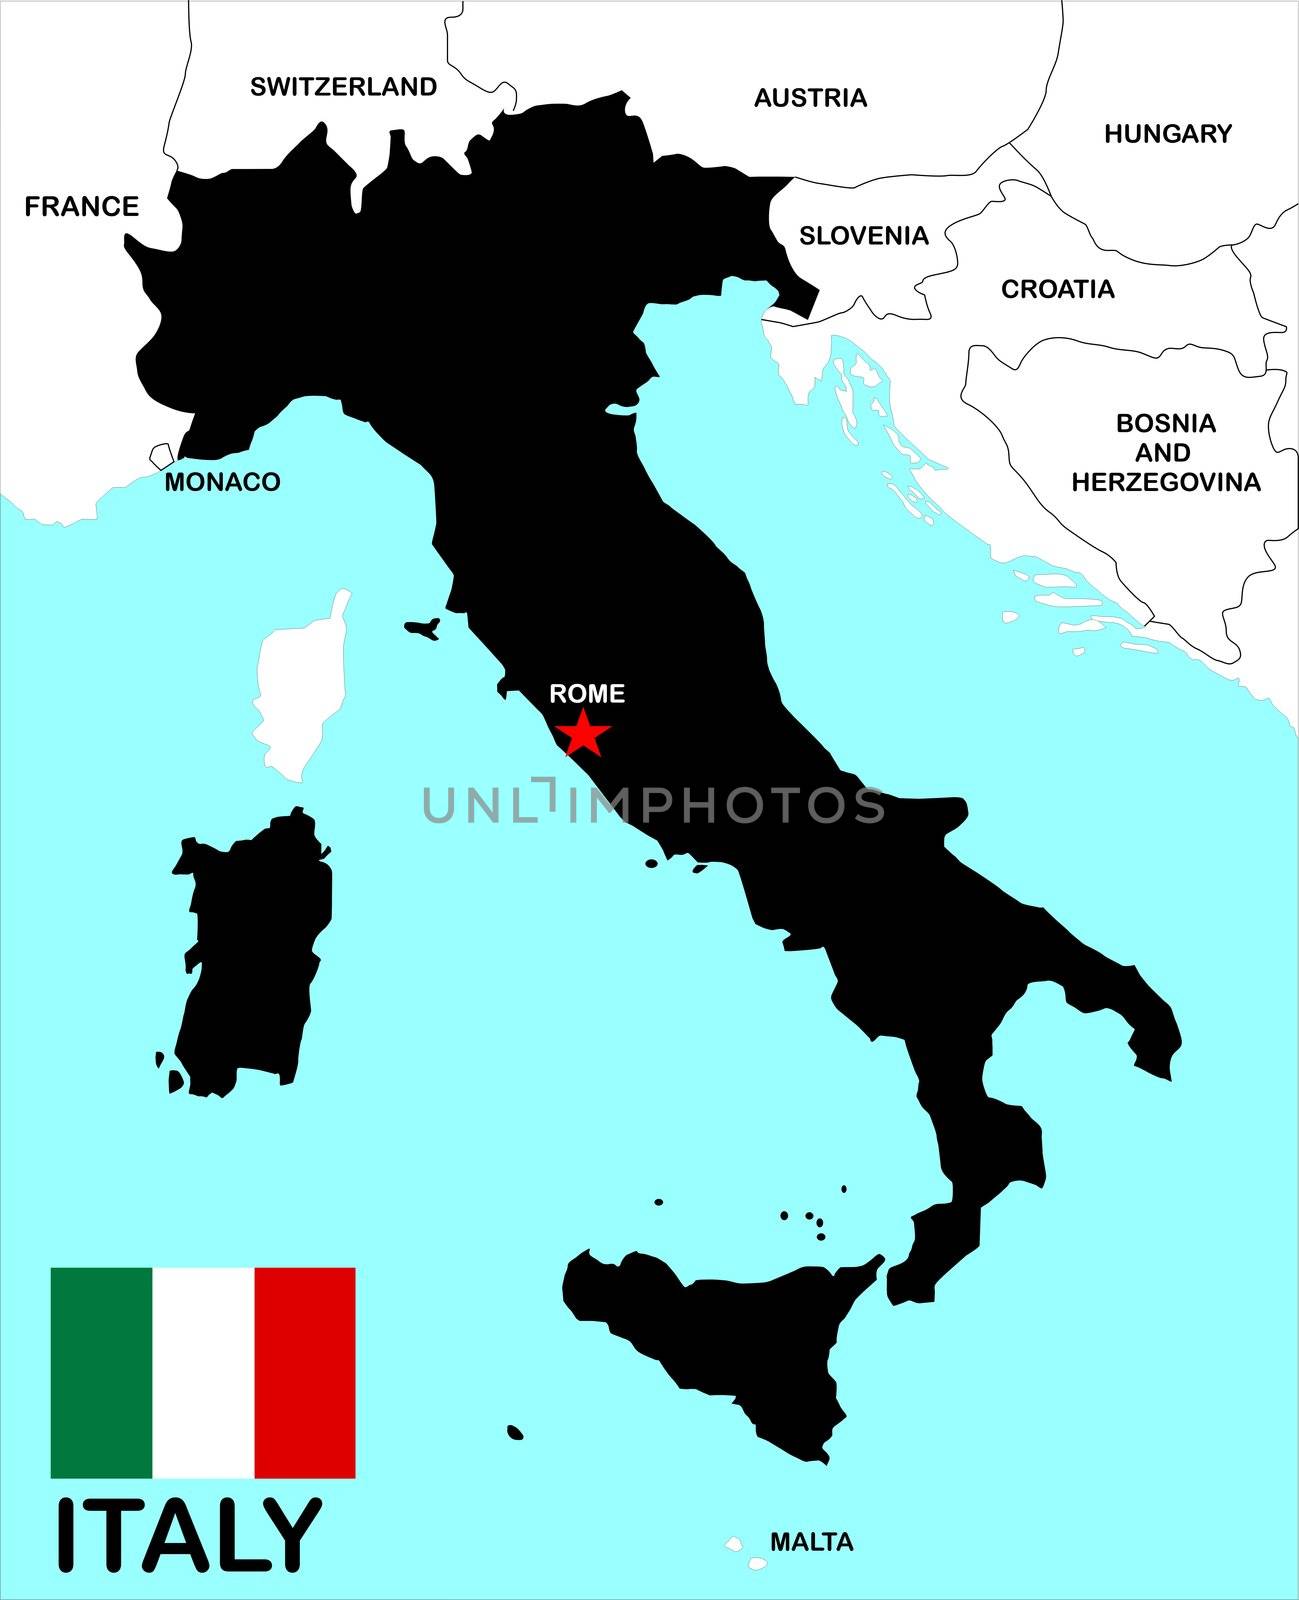 Italy map and flag over white background.